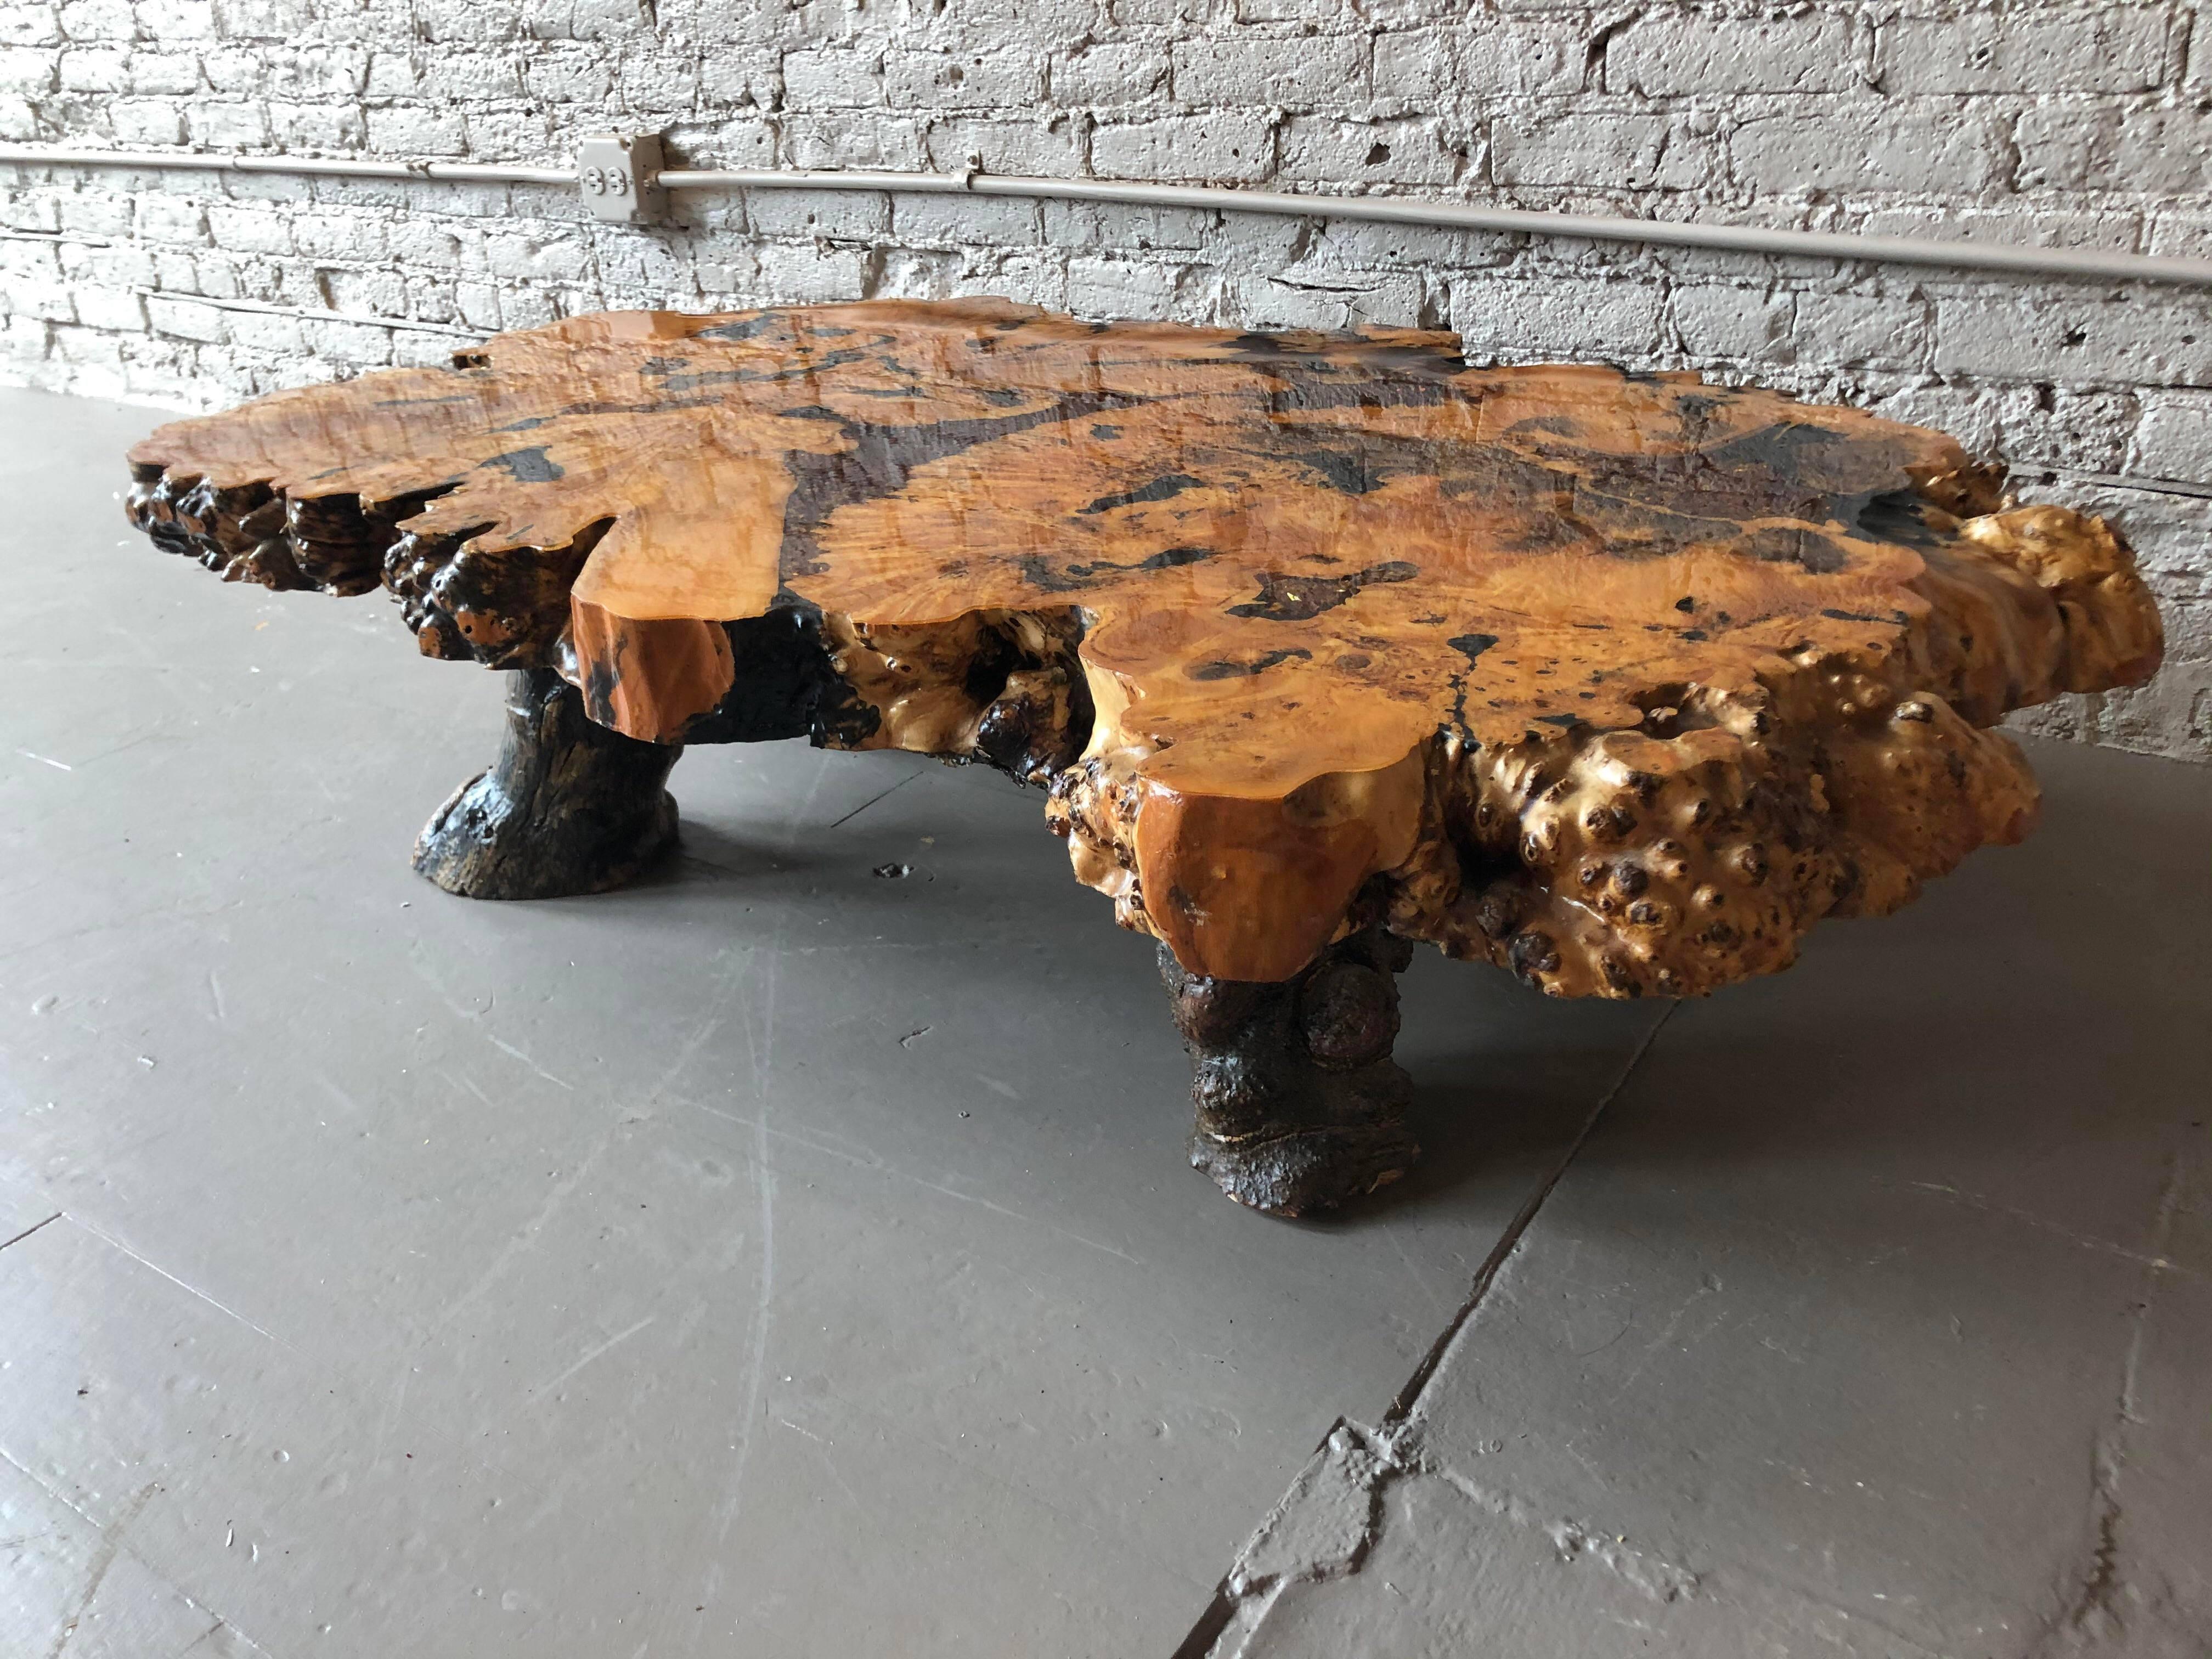 Statement piece. The table has a beautiful epoxy finish with brown crystals in btwn some of the wood. The wood and finish are in excellent condition.

Dimensions: 56